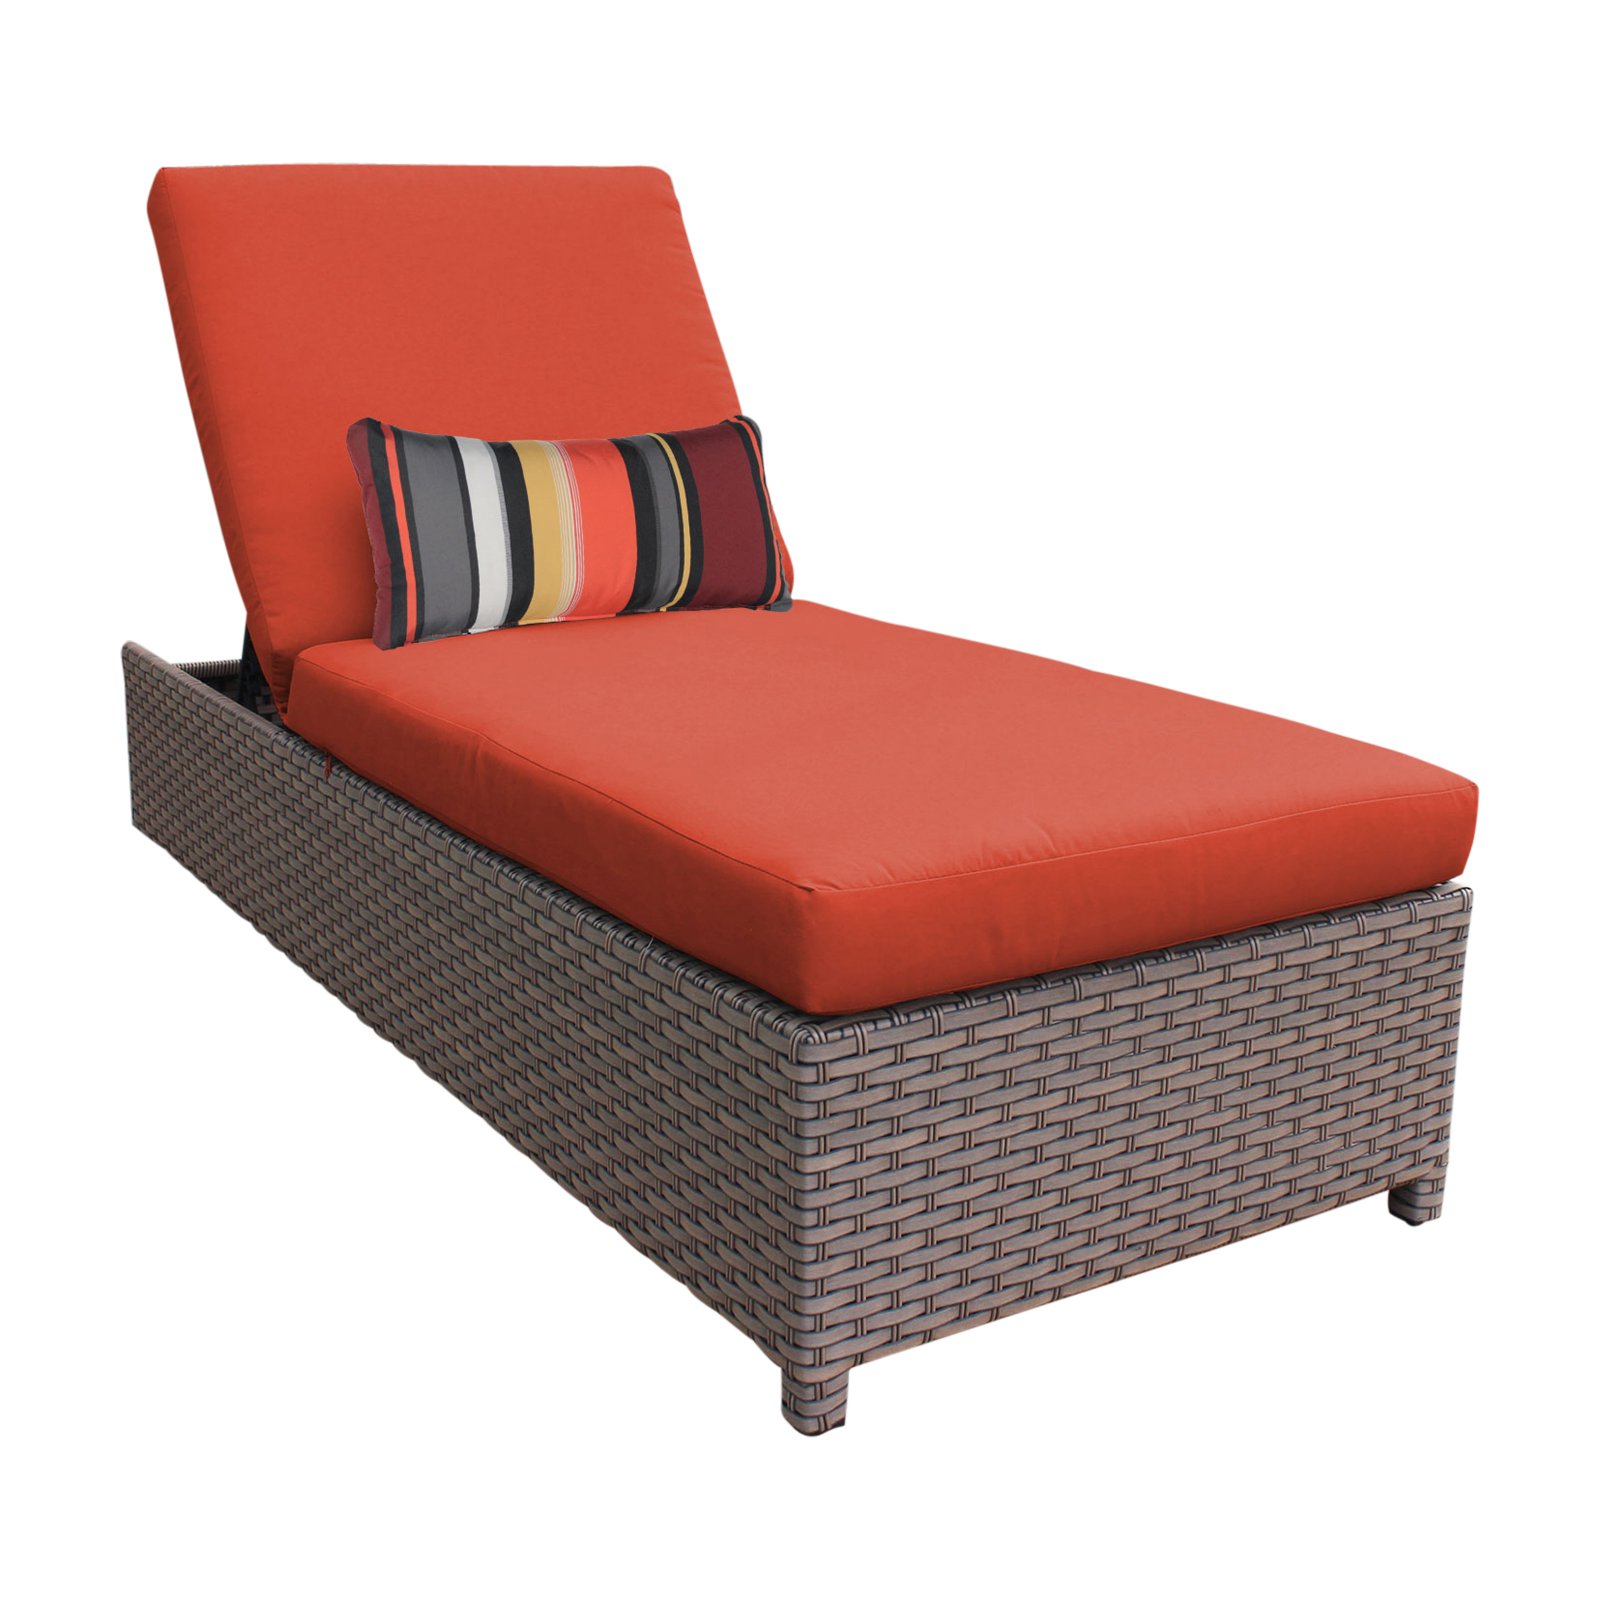 TK Classics Monterey Wheeled Wicker Outdoor Chaise Lounge Chair - image 1 of 11